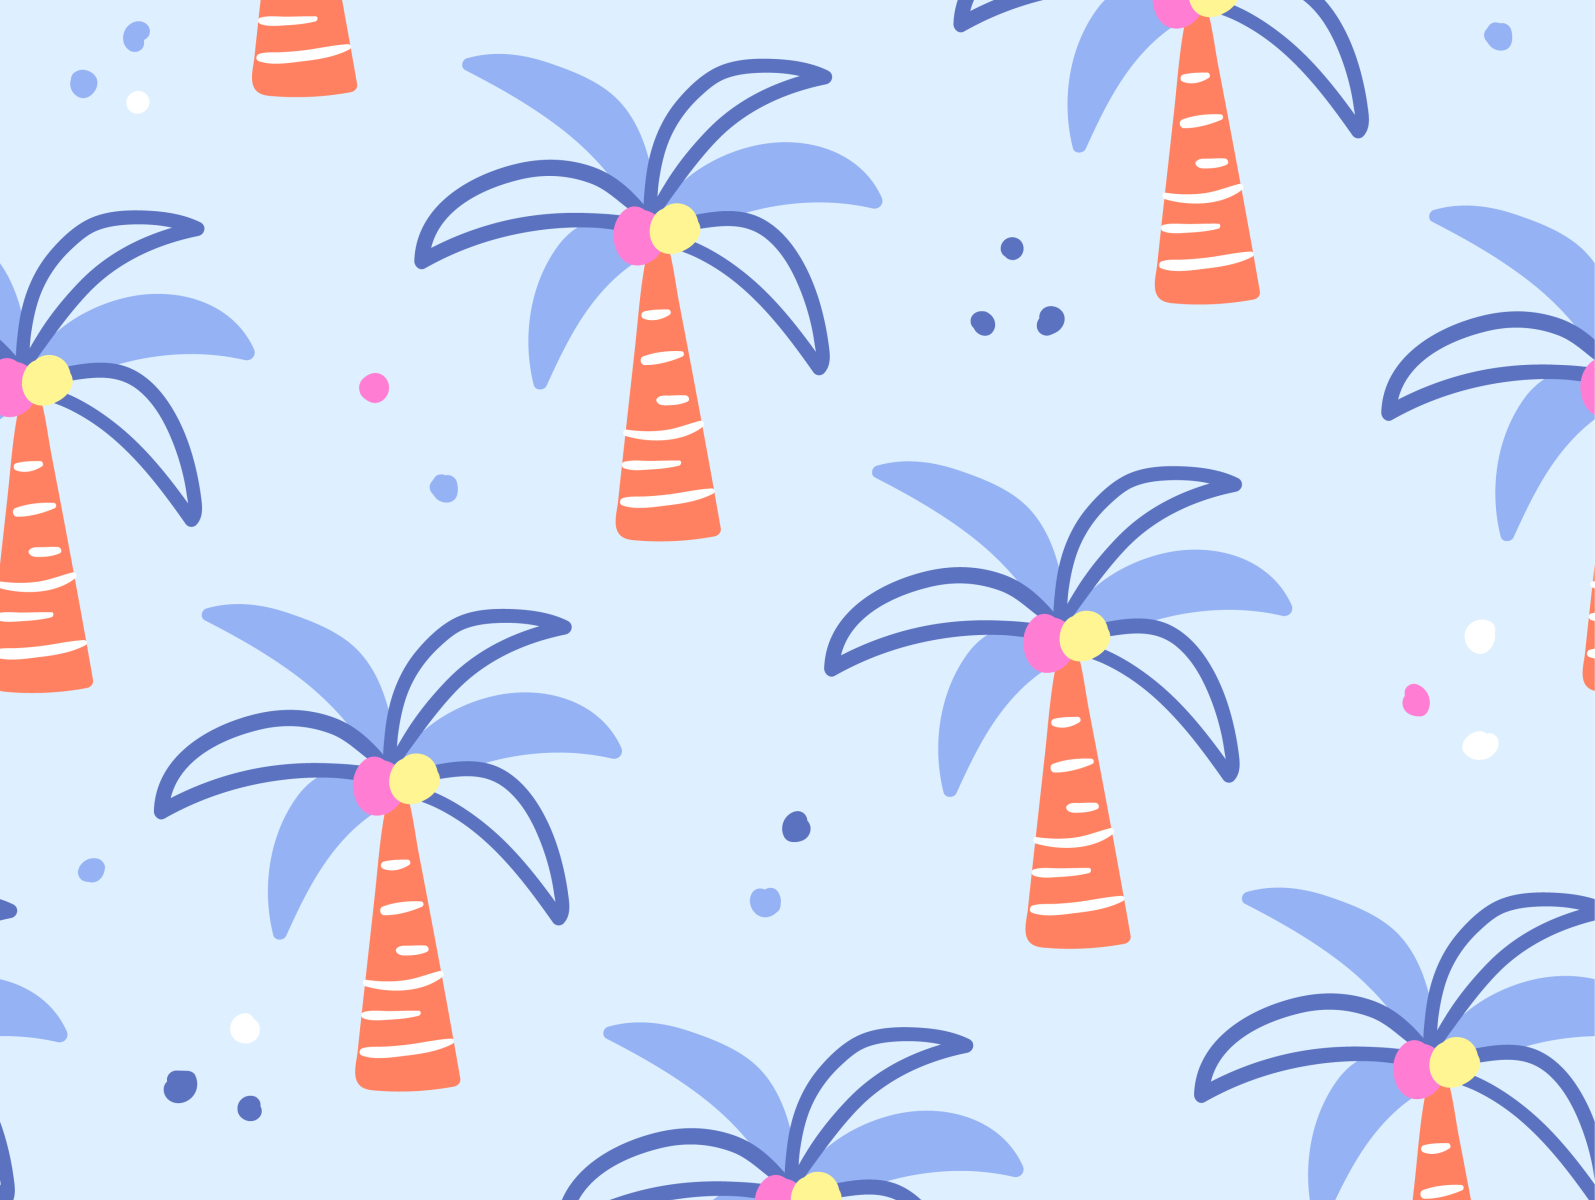 Palm trees pattern by Kenya Aguirre on Dribbble